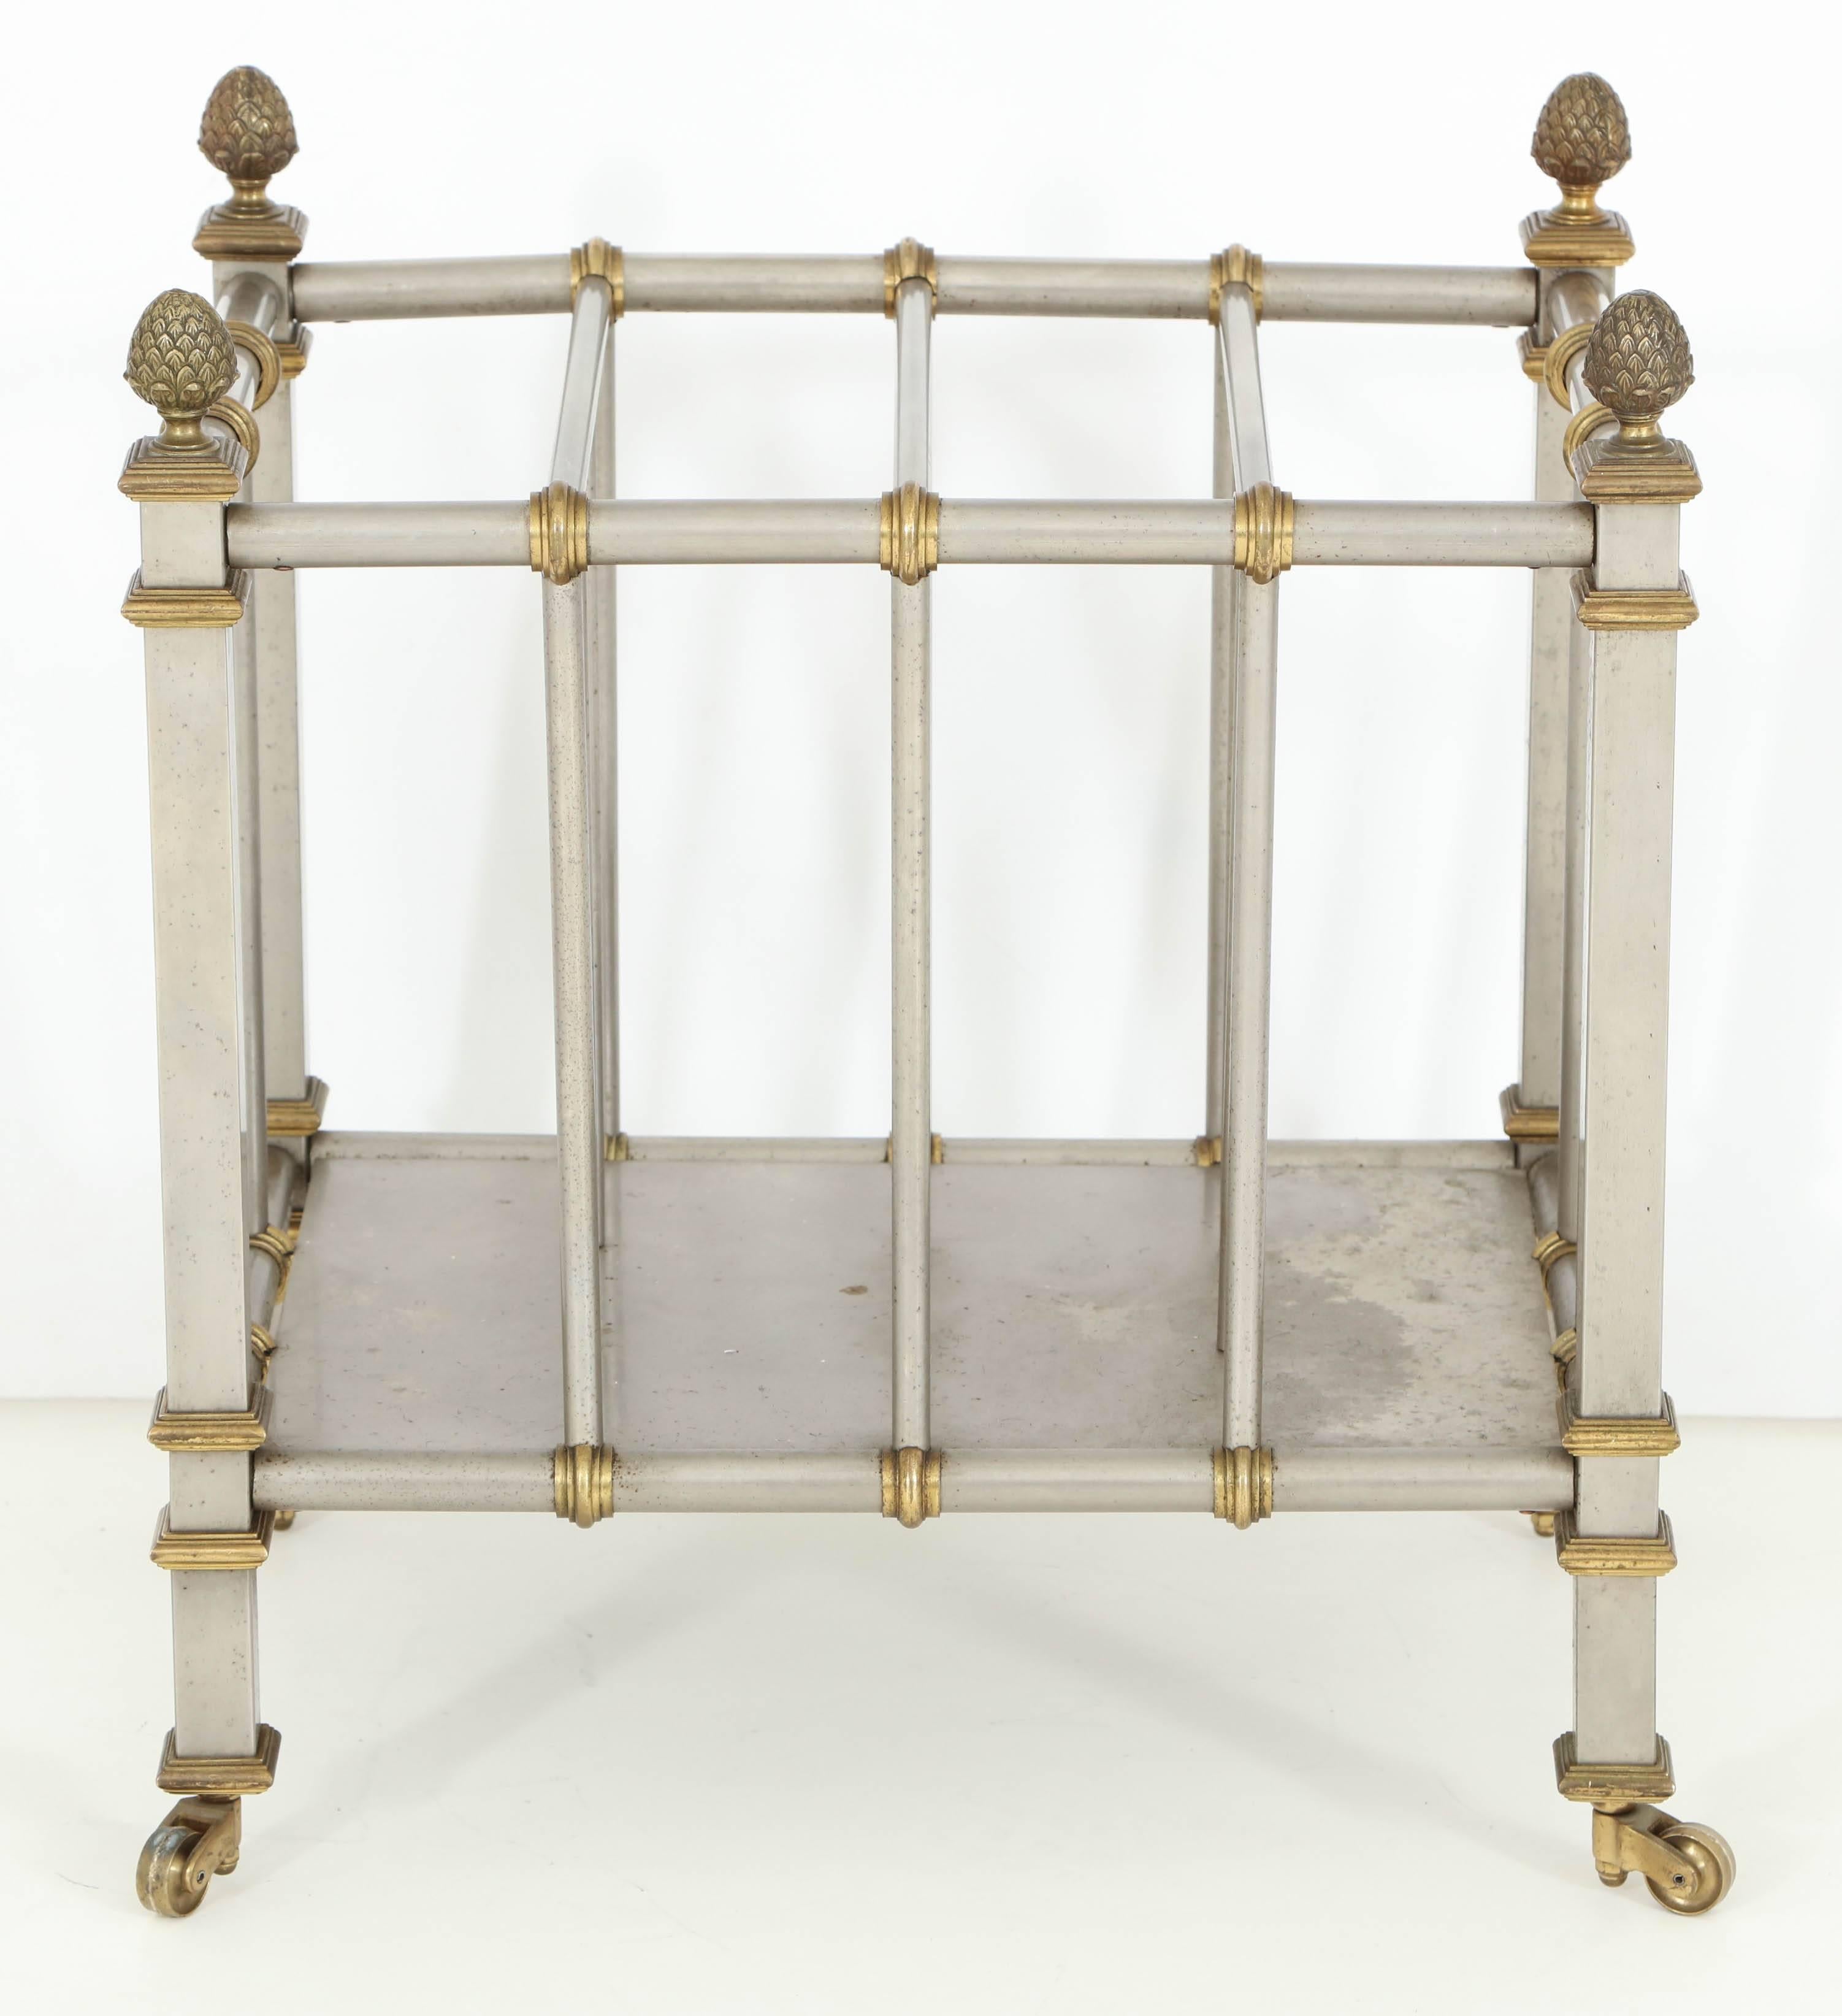 Neoclassical 1960s steel and brass magazine trolley after Maison Jansen.